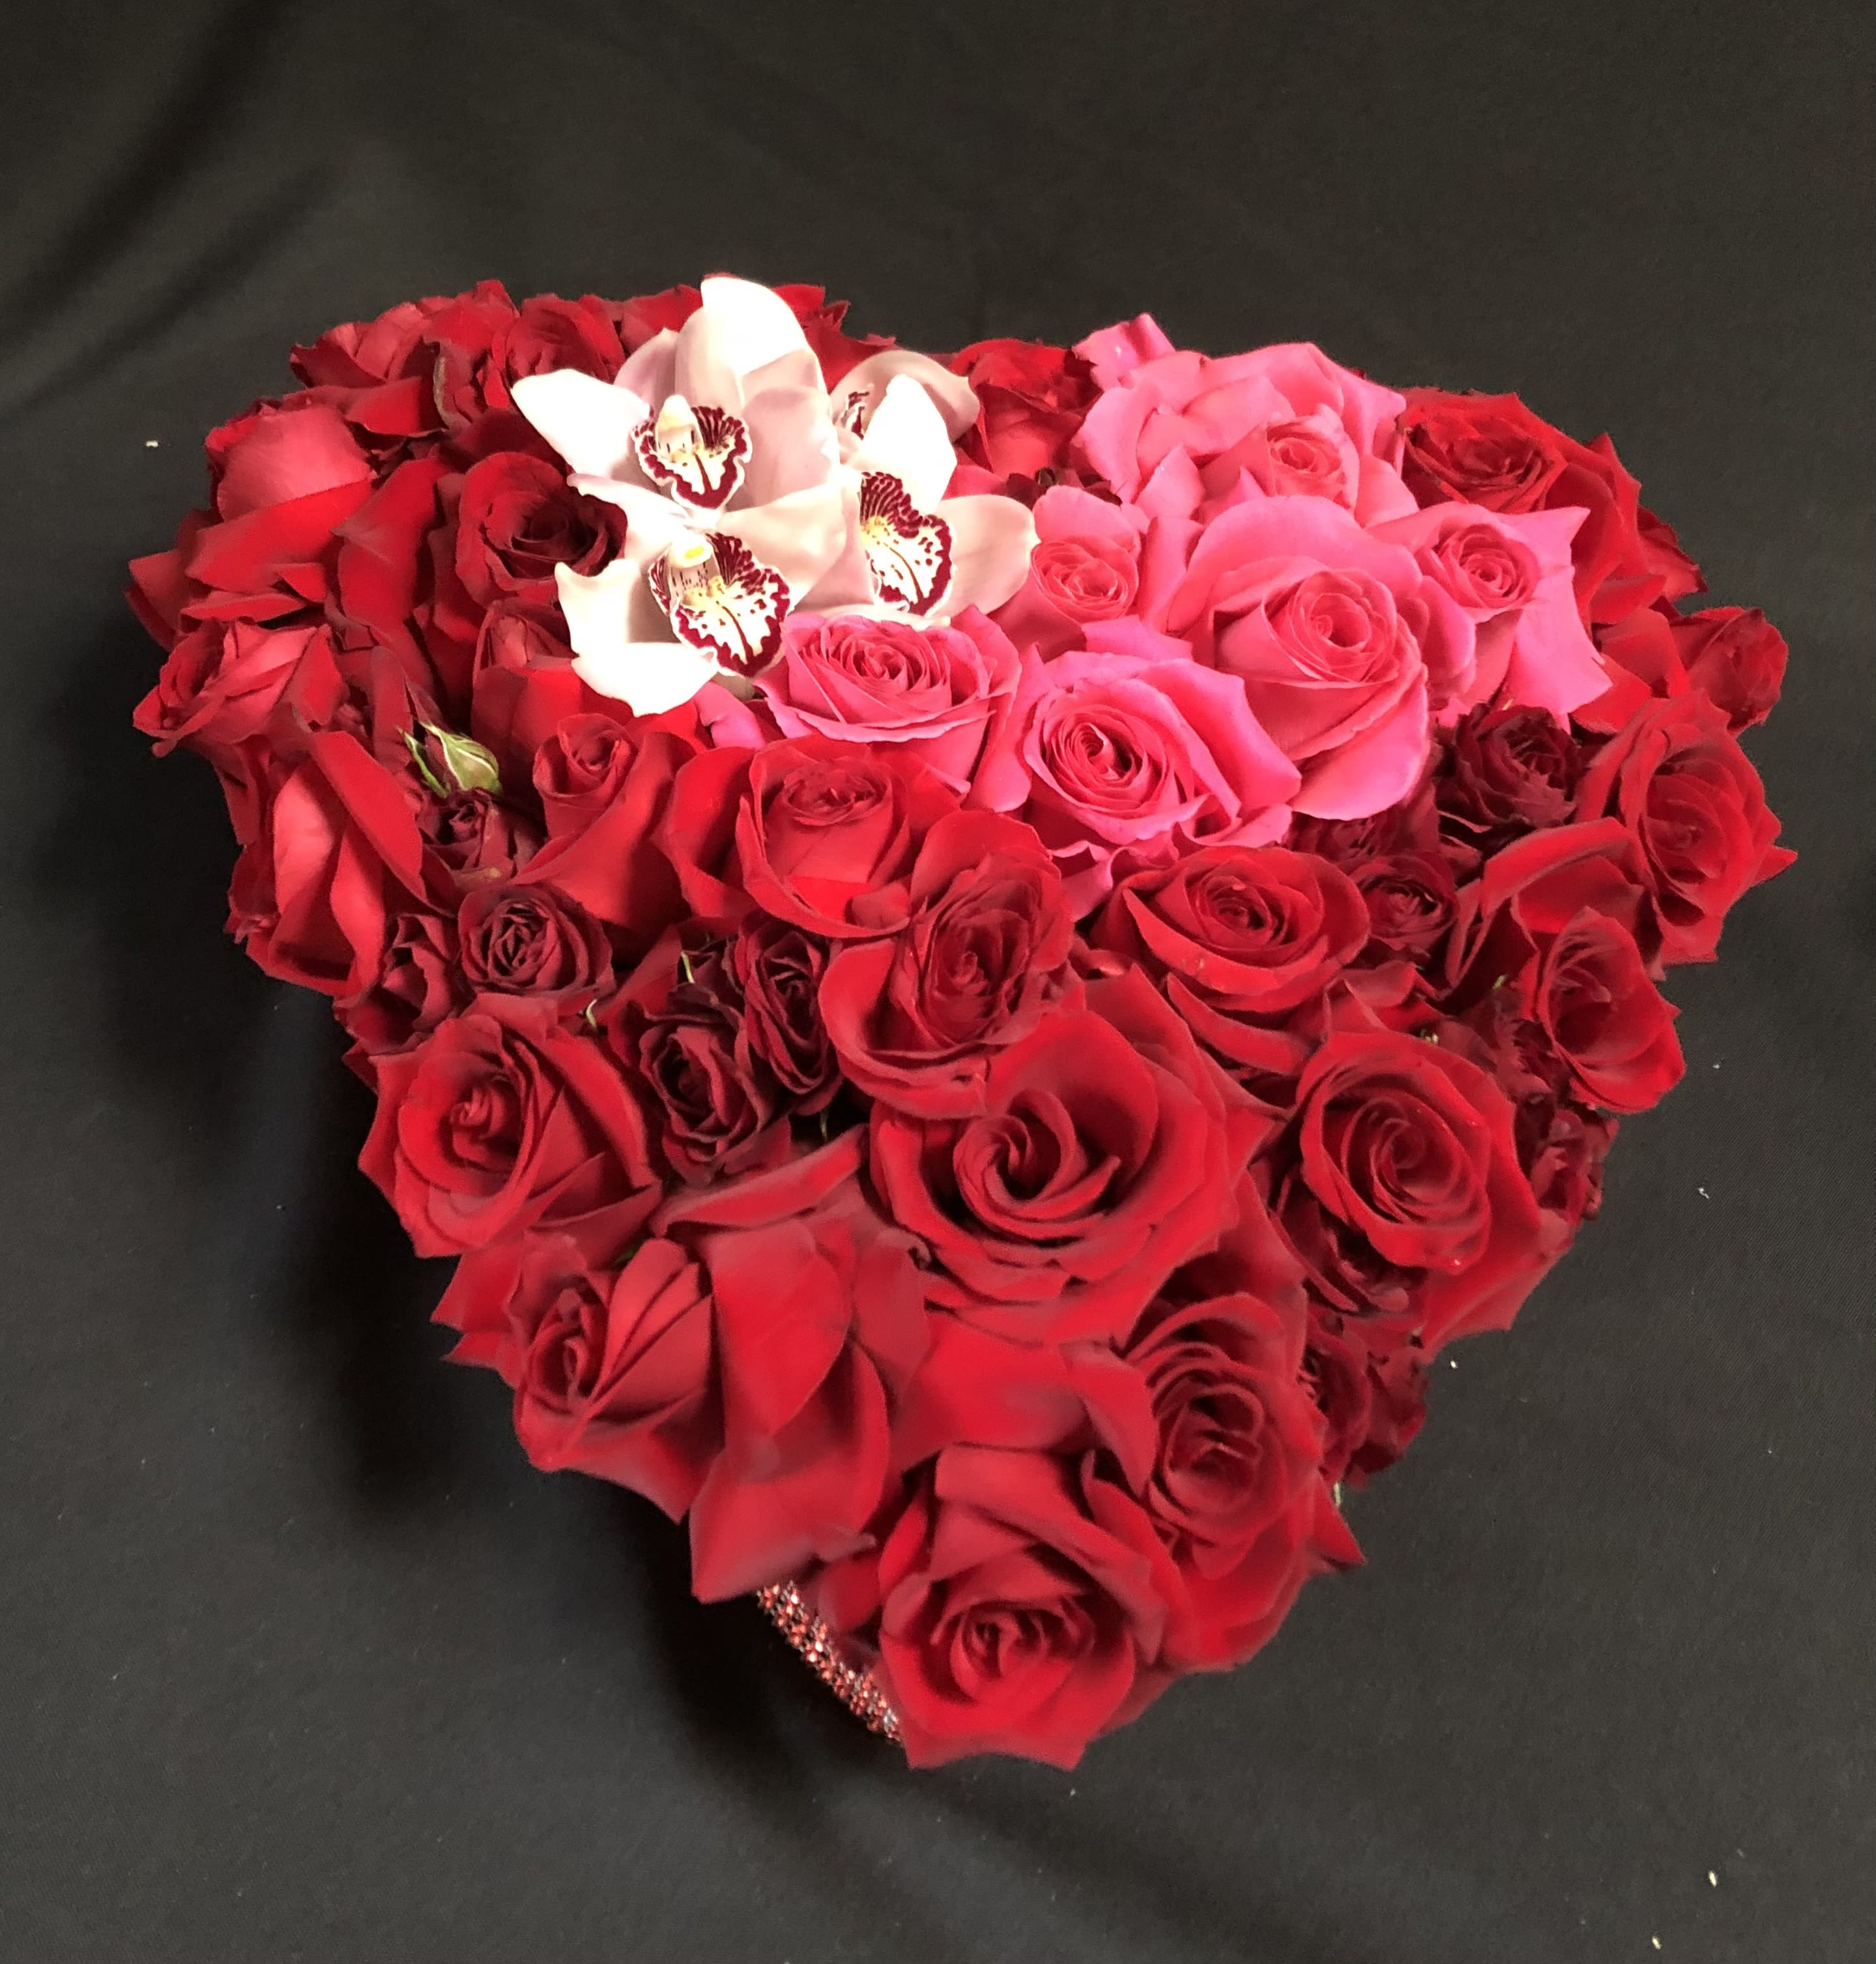 I heart you #VALl2 - Heart shape Box. About 30 or more red and pink roses with touch of Orchids 